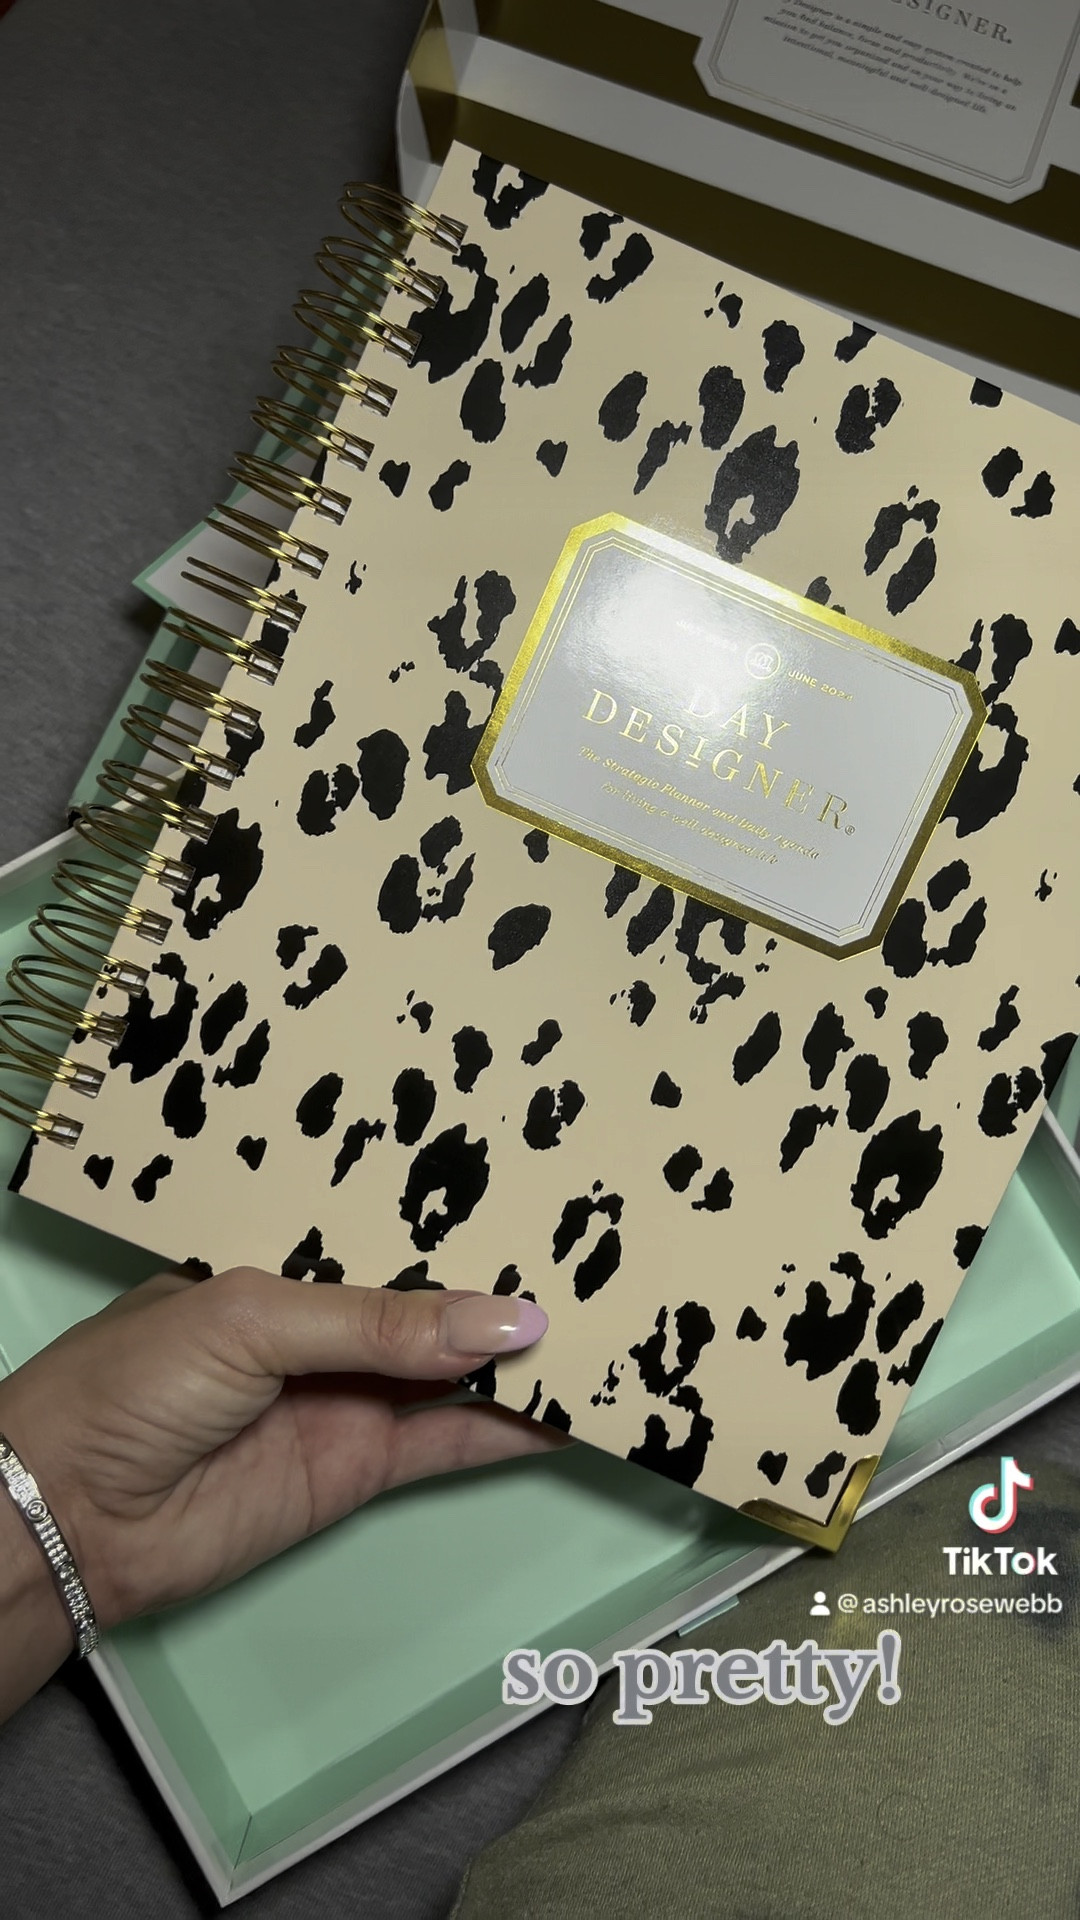 DAY DESIGNER | 2024 Daily Planner - Painted Leopard